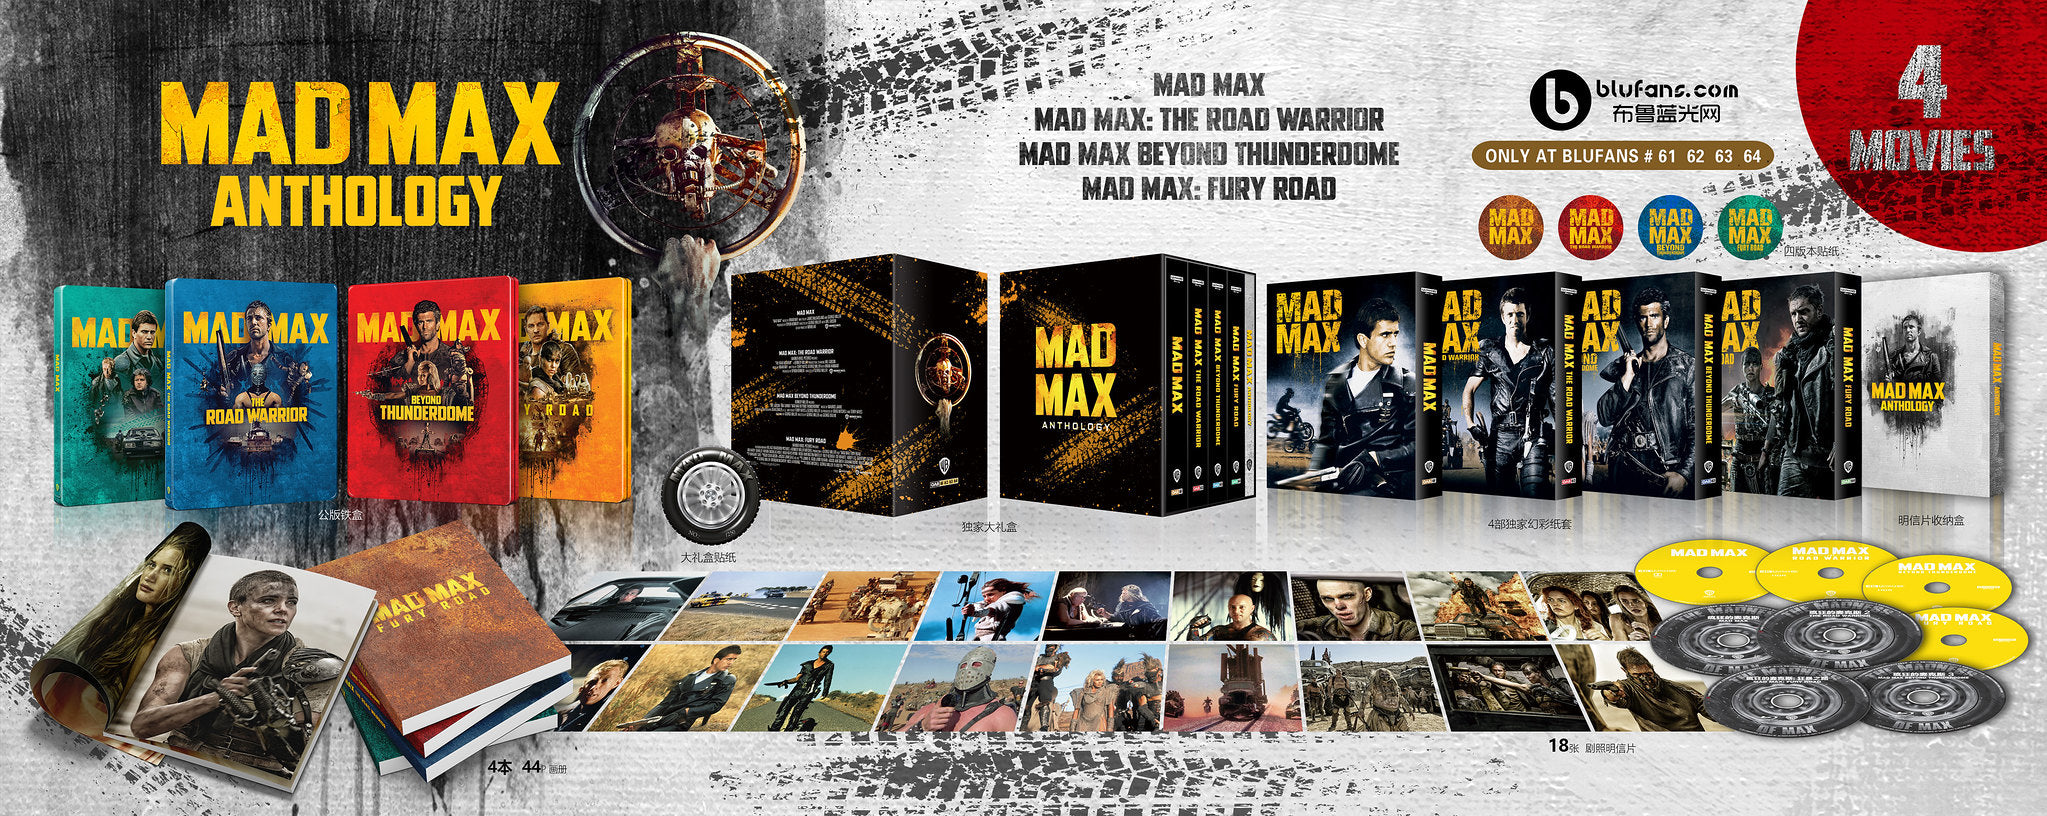 Mad Max Anthology 4K 1-Click SteelBook (Blufans OAB #61-64 